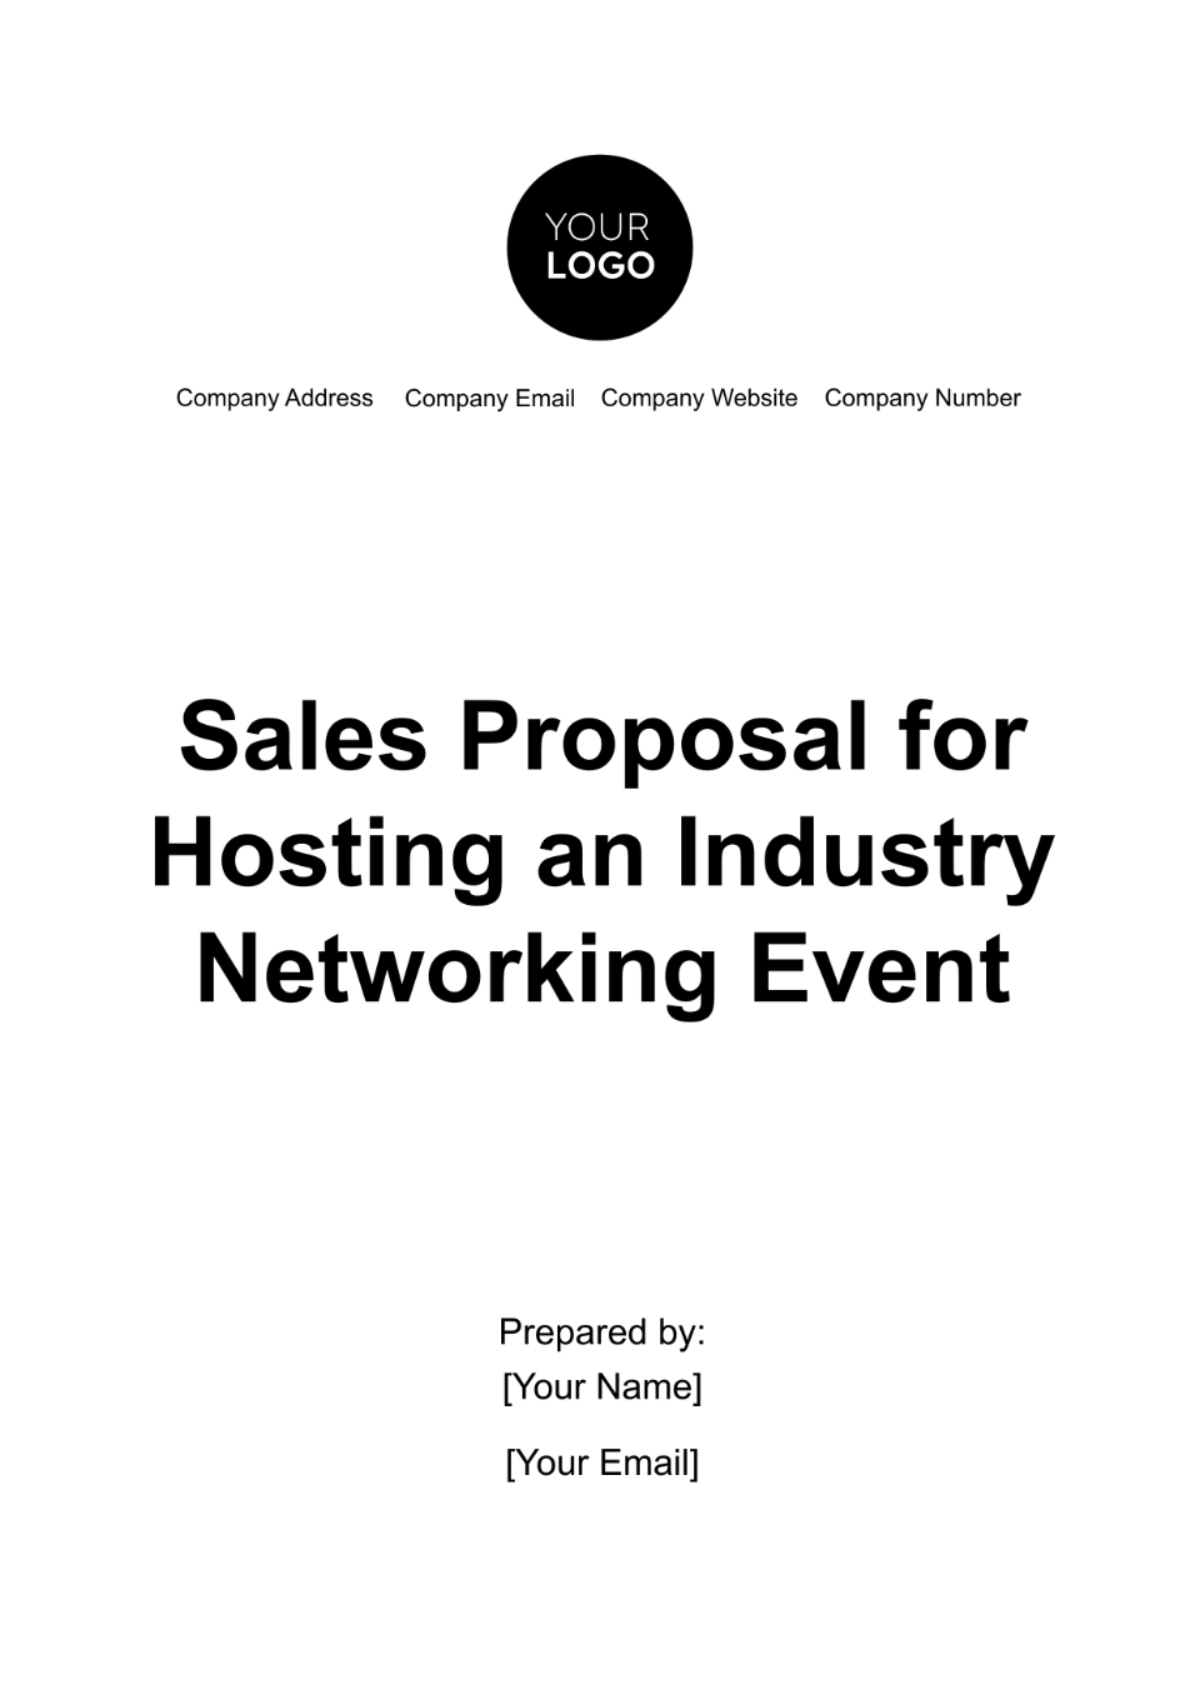 Sales Proposal for Hosting an Industry Networking Event Template